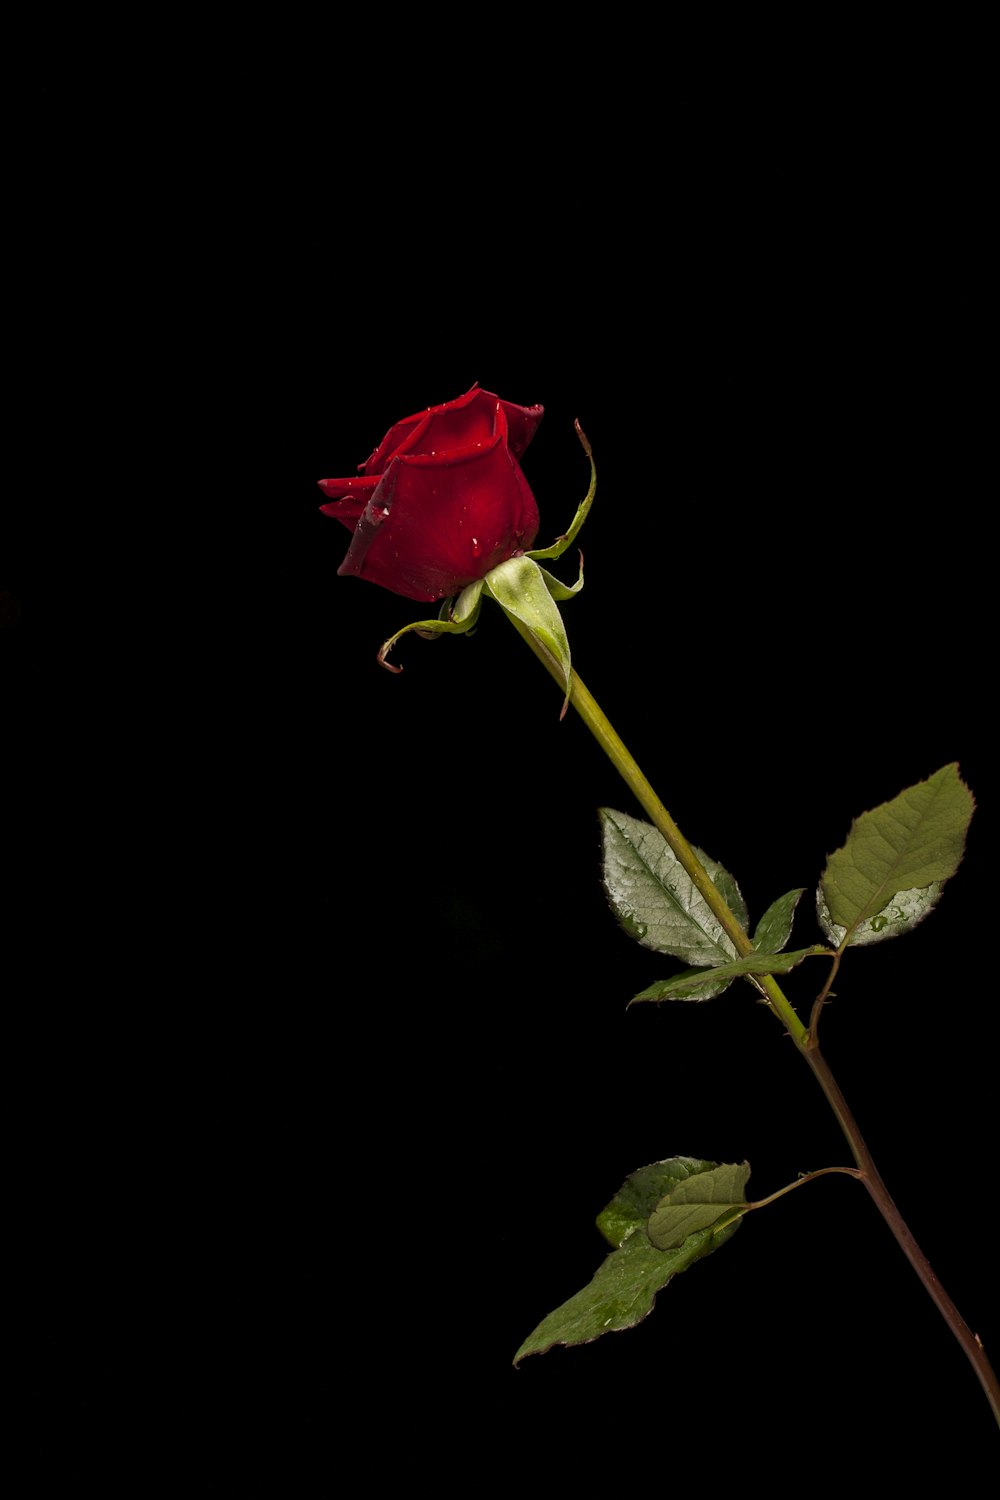 red rose in bloom with black background